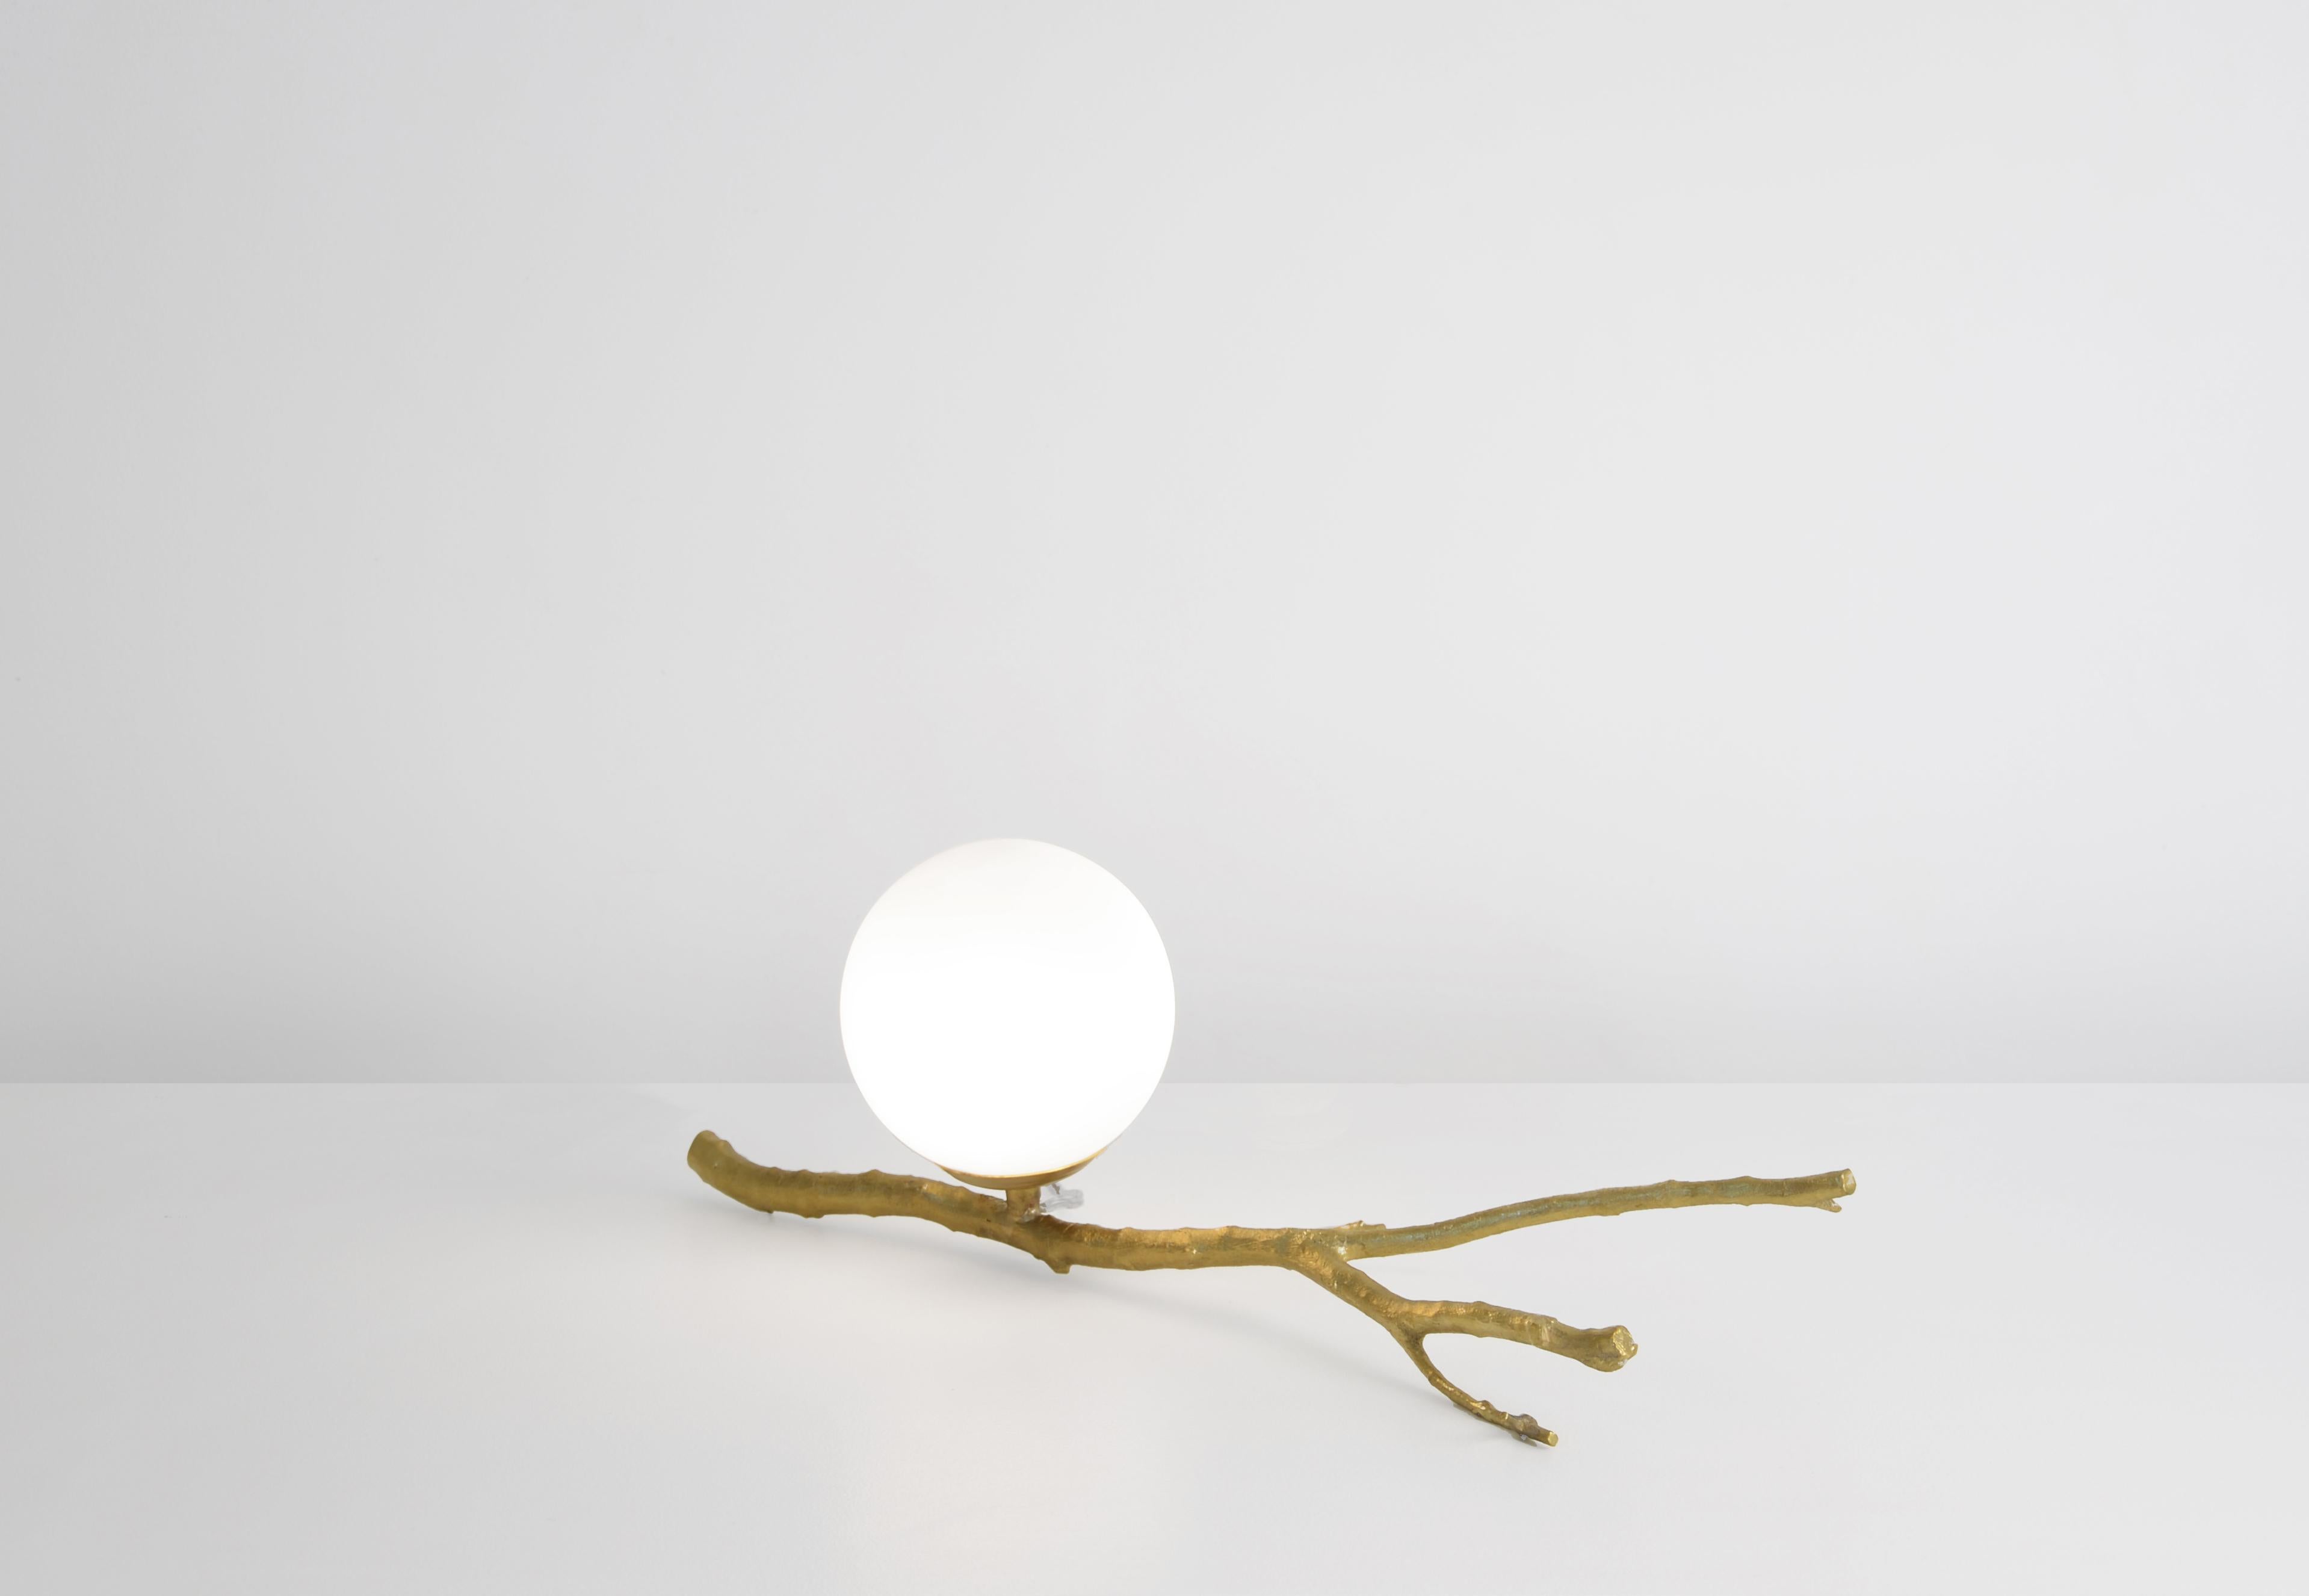 Sabiá Brazilian contemporary poetic minimalist table lamp in cast bronze designed by Cristiana Bertolucci.

Literal inspiration of nature, the Sabiá lamp is produced in cast bronze where the twig itself serves as a casting mold.

Delicate, simple